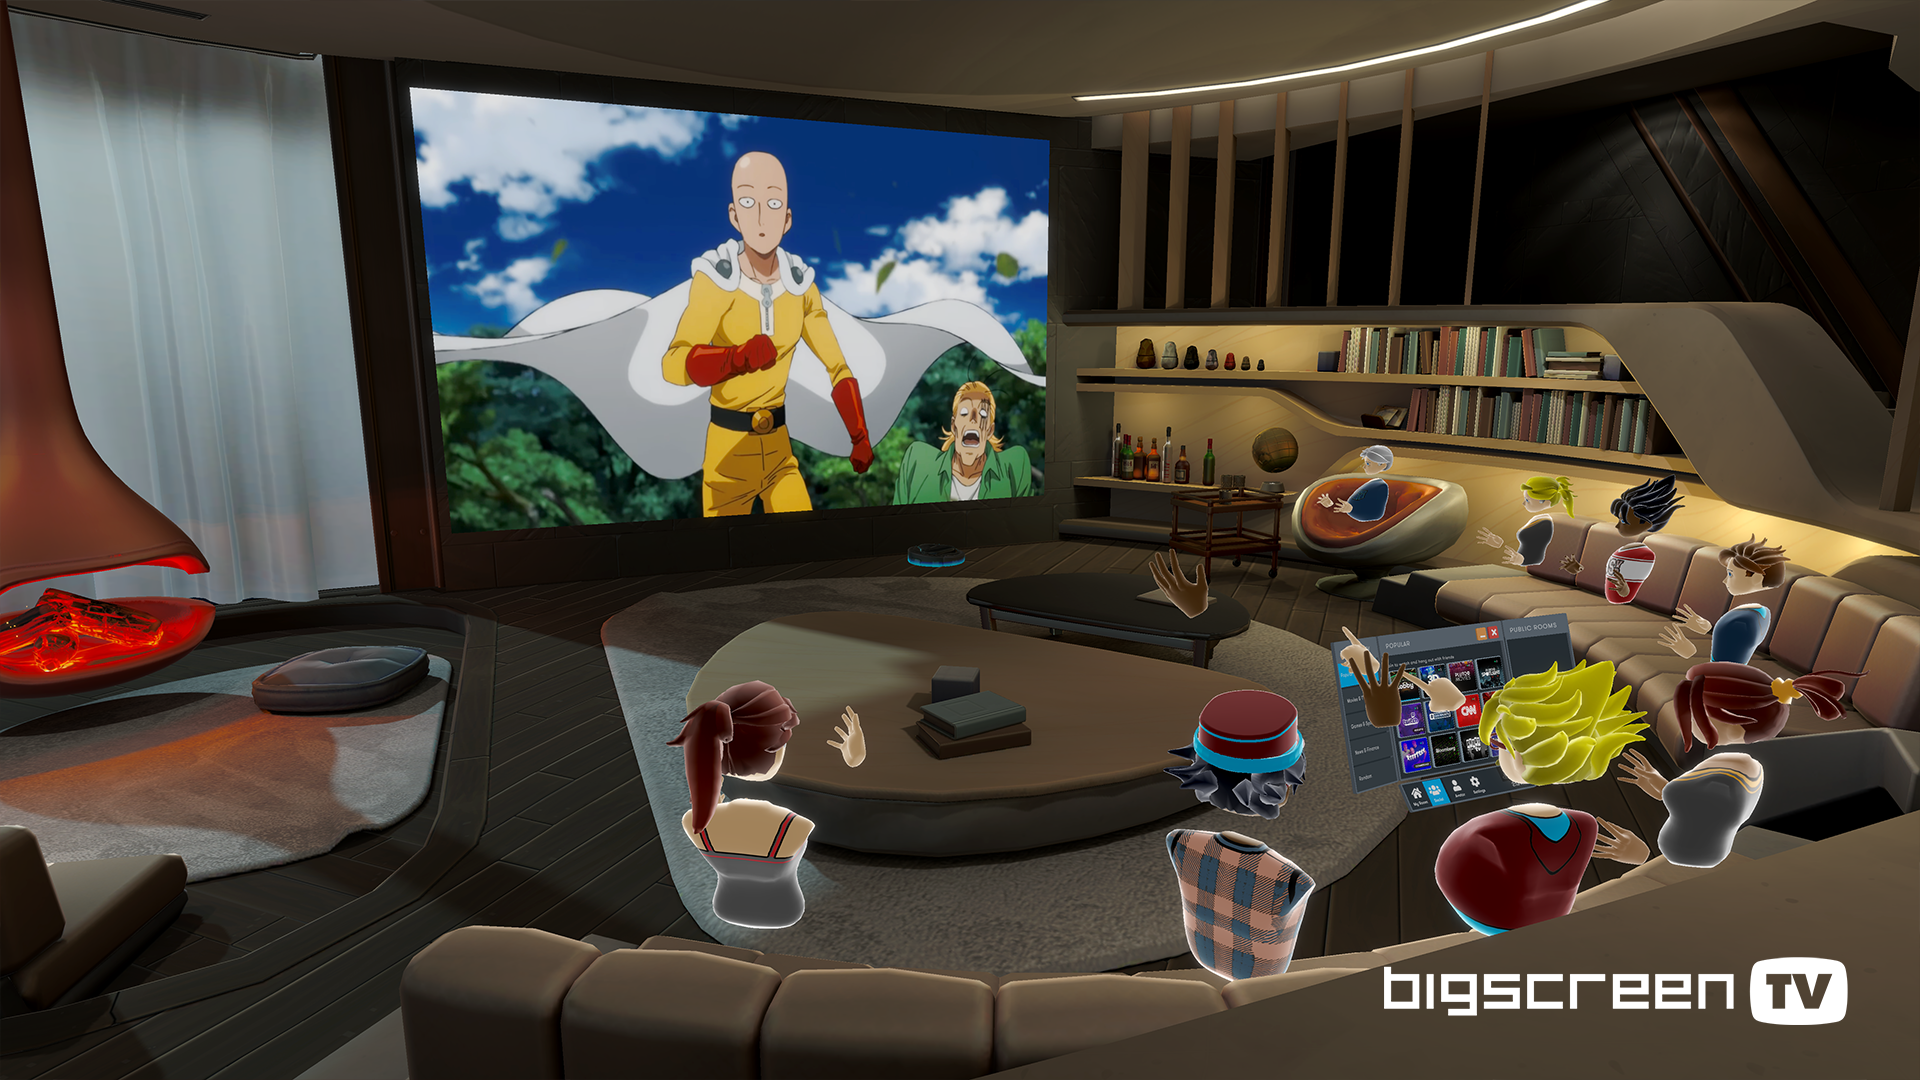 vr - Experience The Cinema and More in Virtual Reality - Anywhere, Anytime